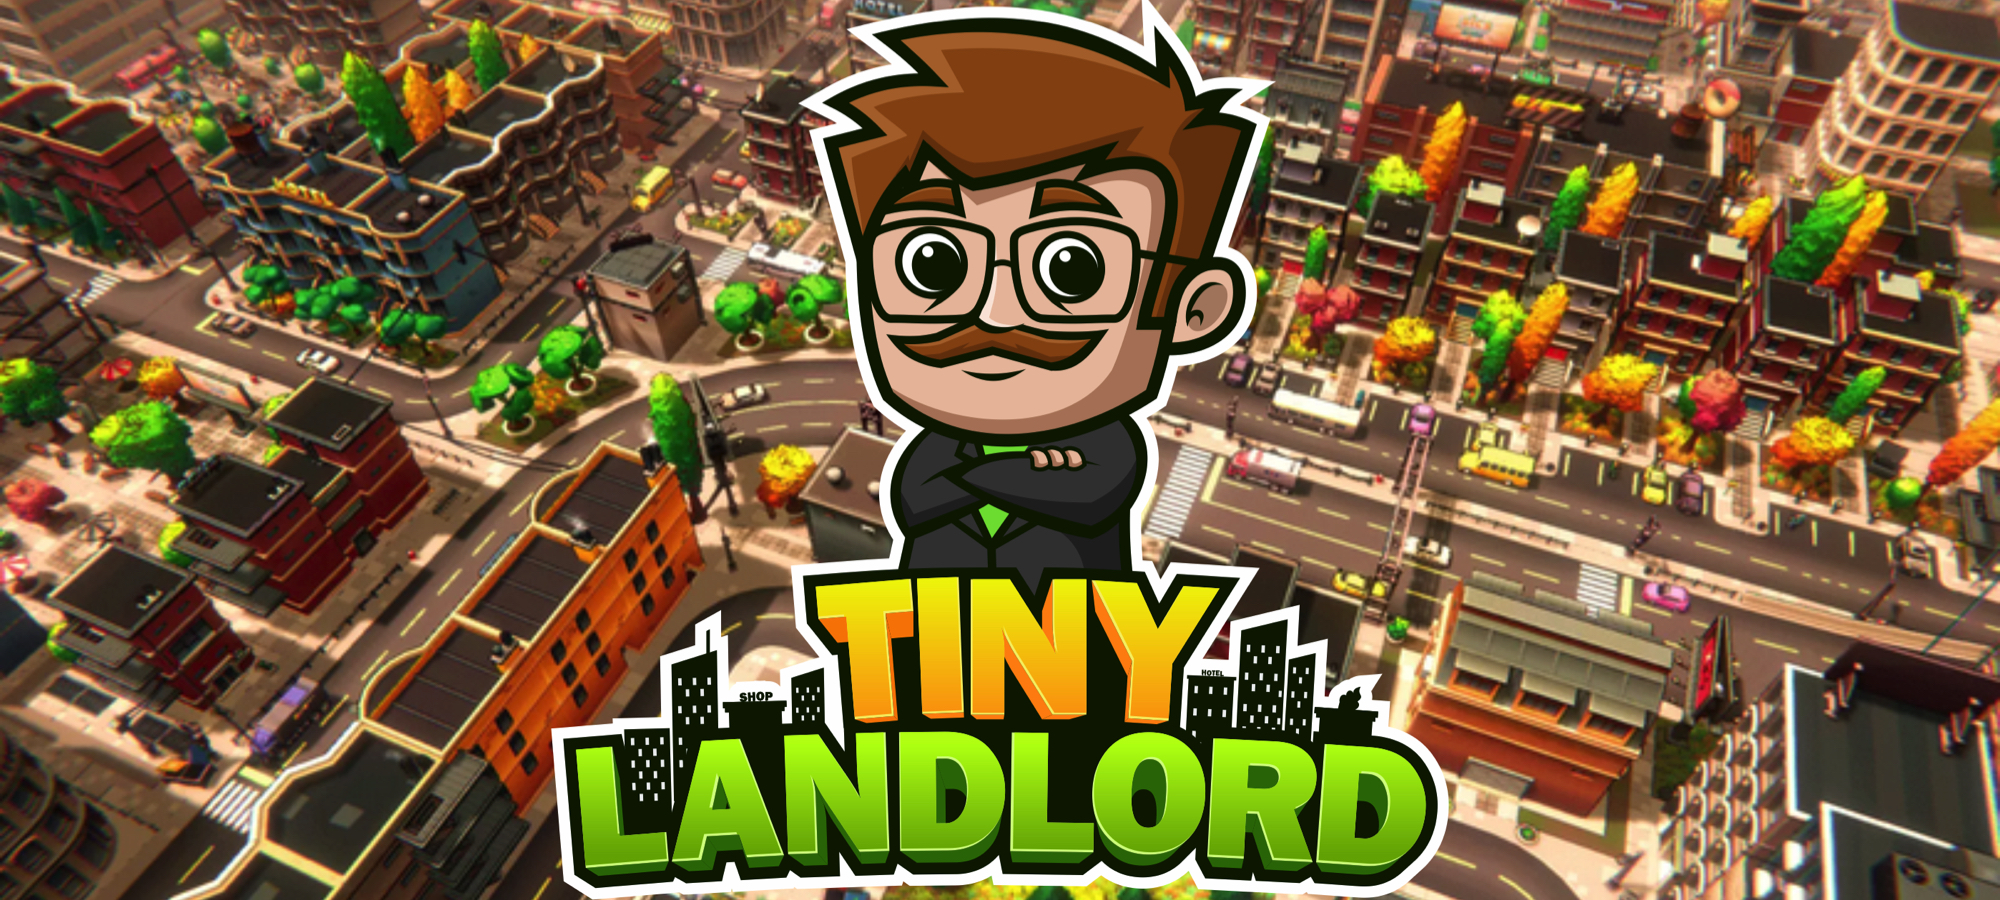 Tiny Landlord: Idle City & Town Building Simulator Game - Unblocked Games WTF